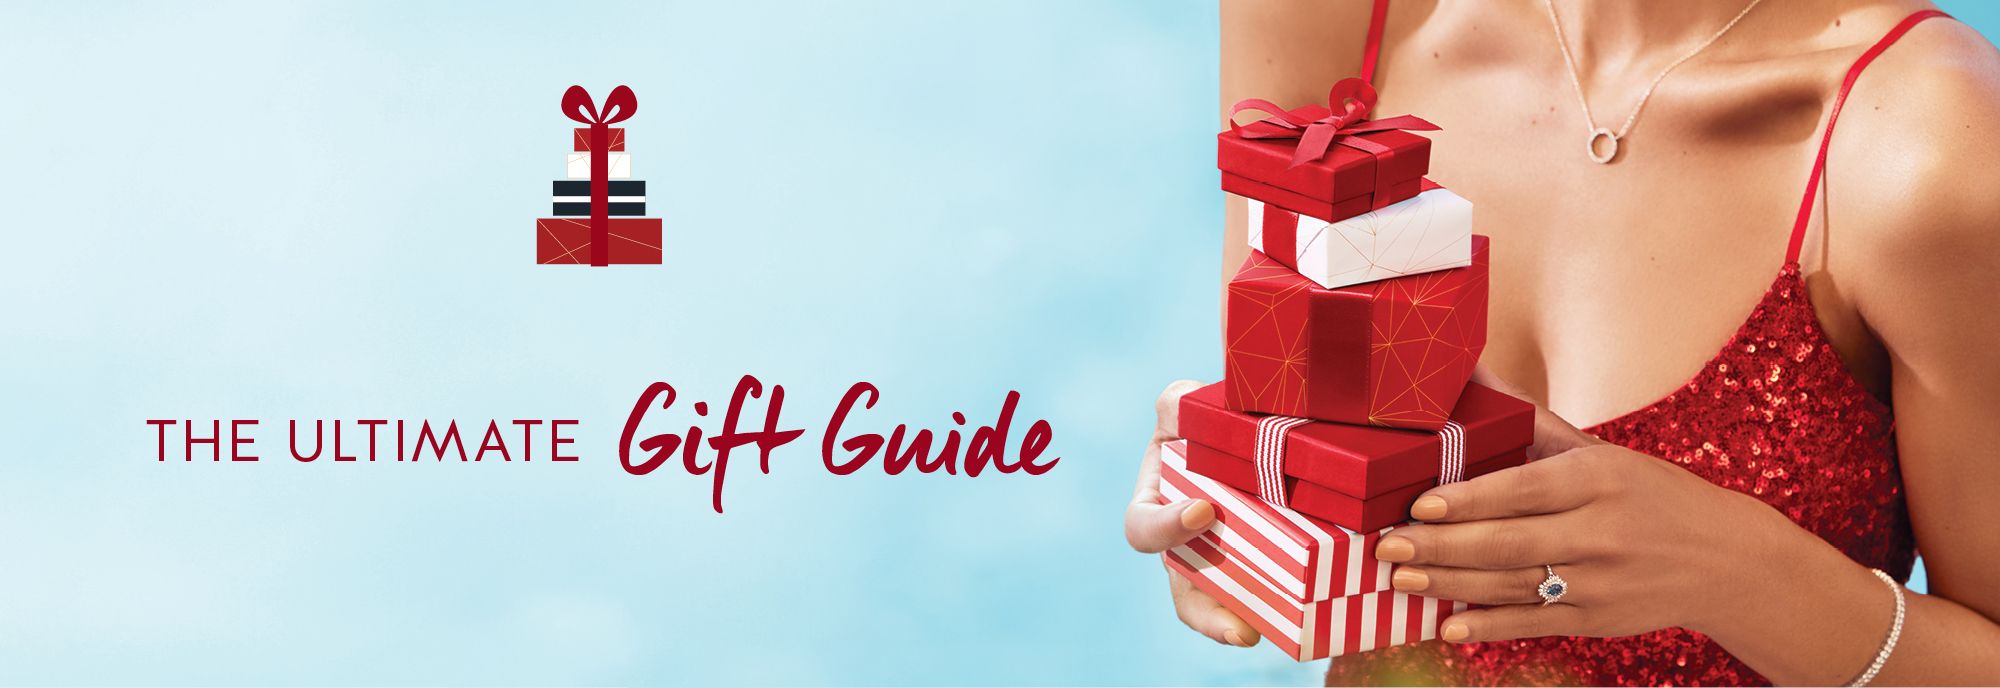 THE ULTIMATE Gift Guide